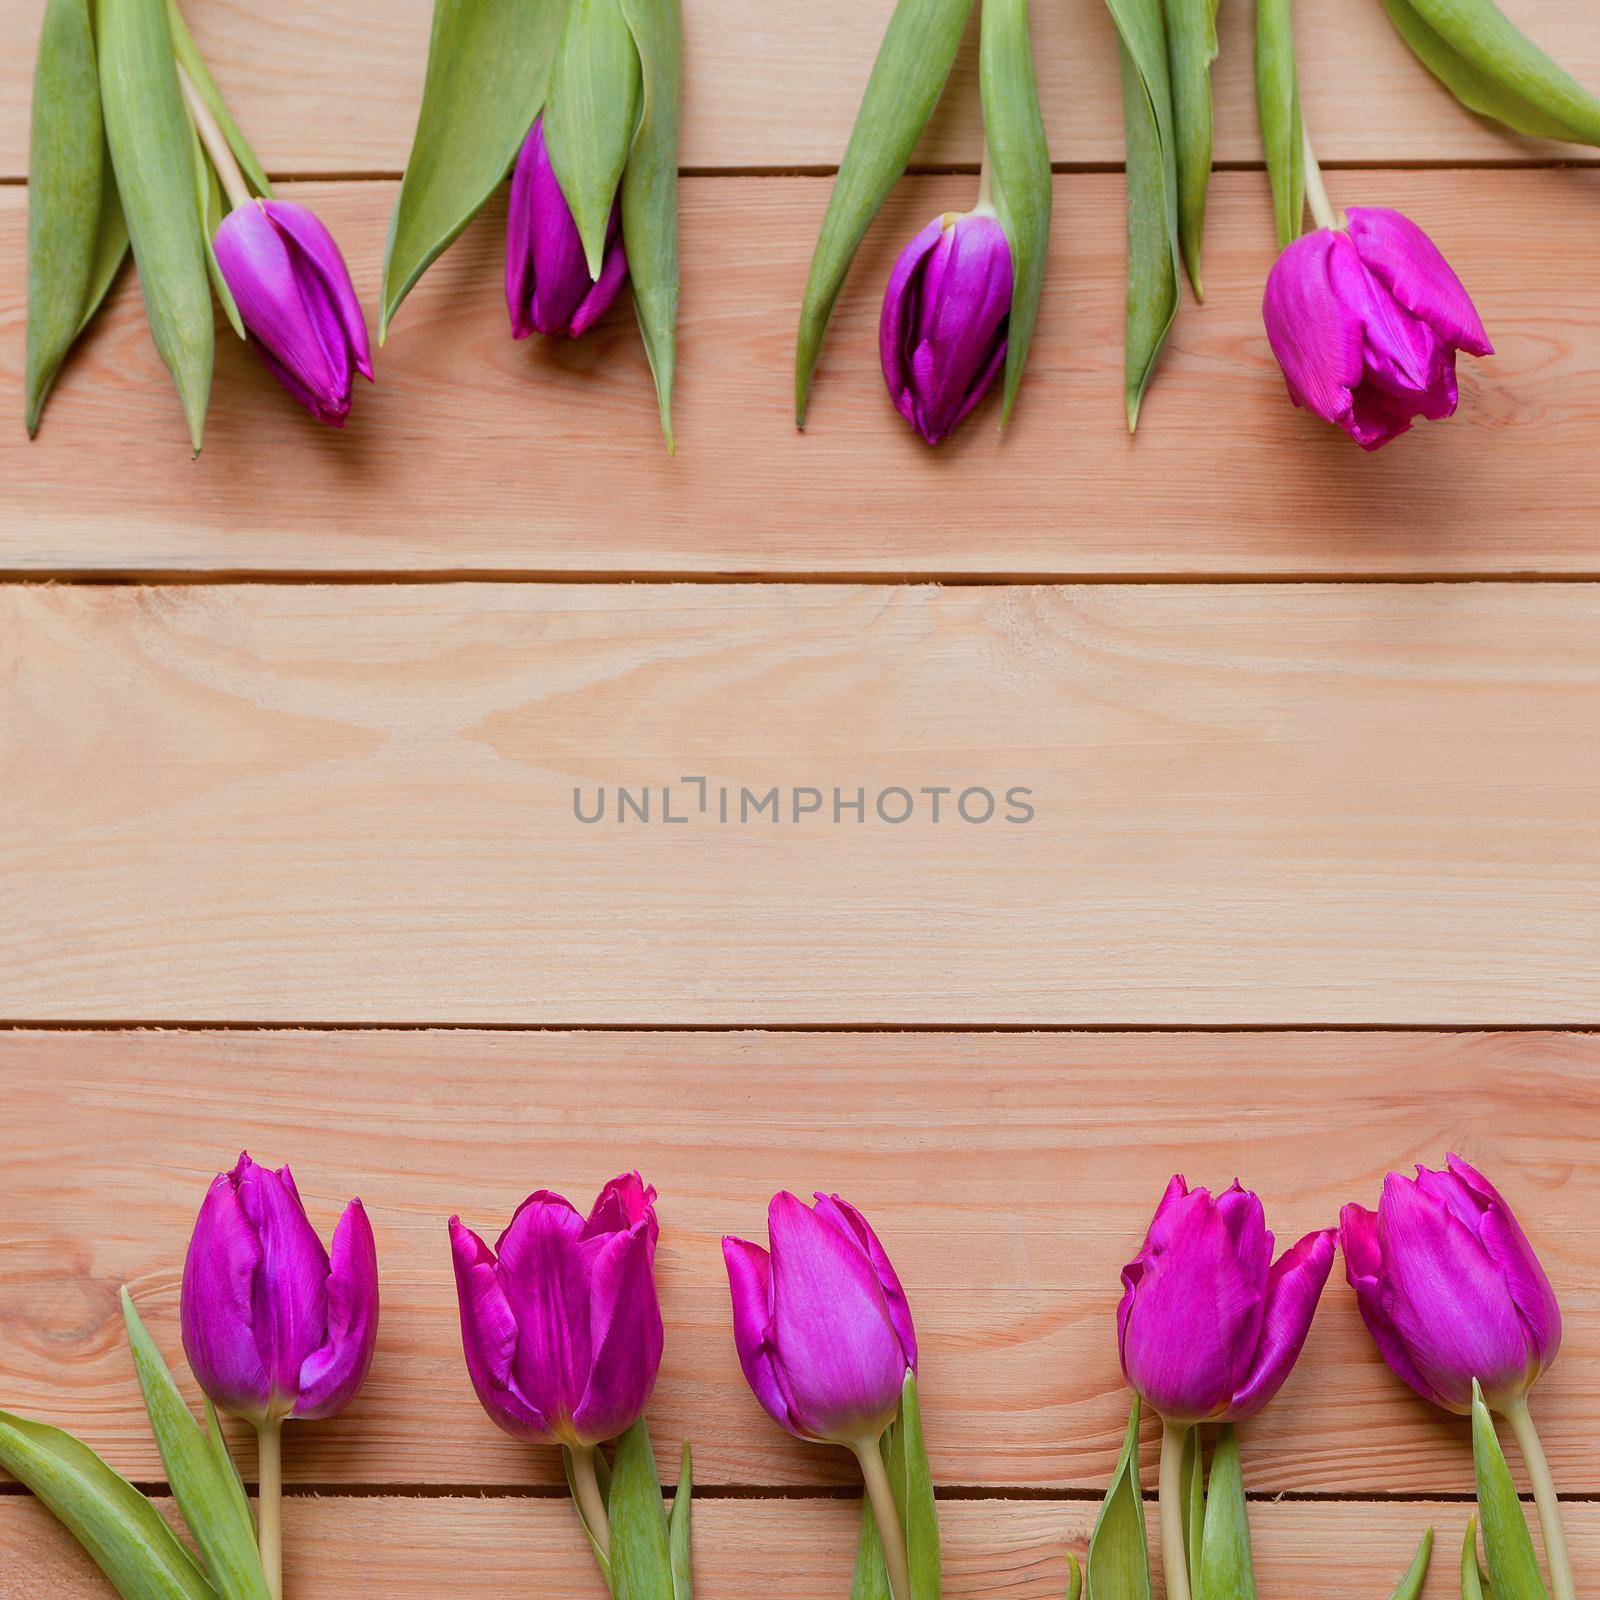 square image of violet Spring Tulips Flowers on wooden table. Blooming spring lavender-blue petals. Beautiful violet Tulips in spring. Tulip flower with green leafs on wooden background by julija